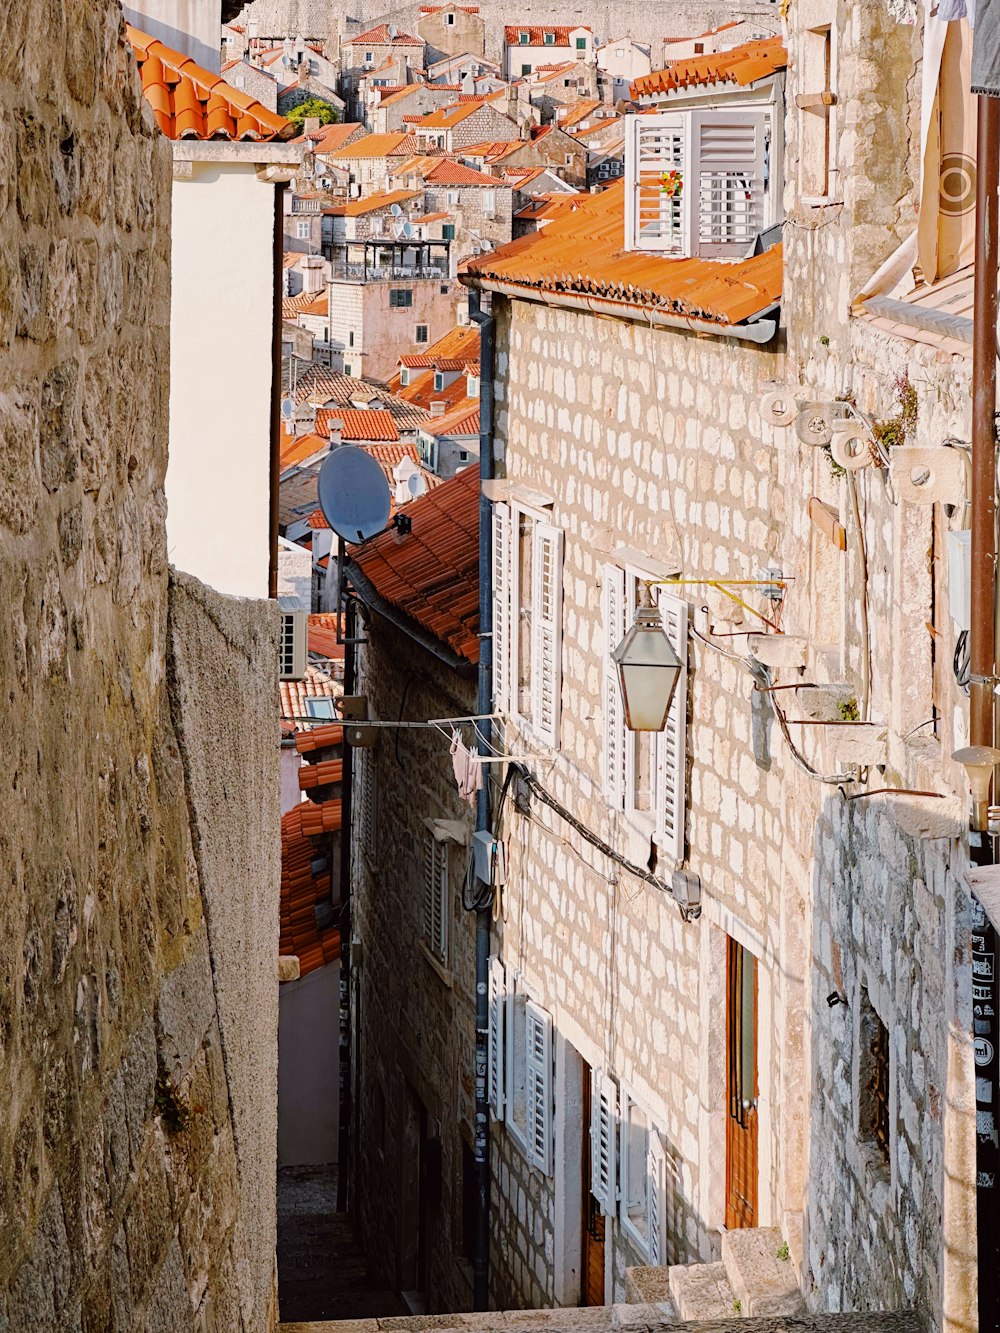 a narrow alley way with buildings and a street light